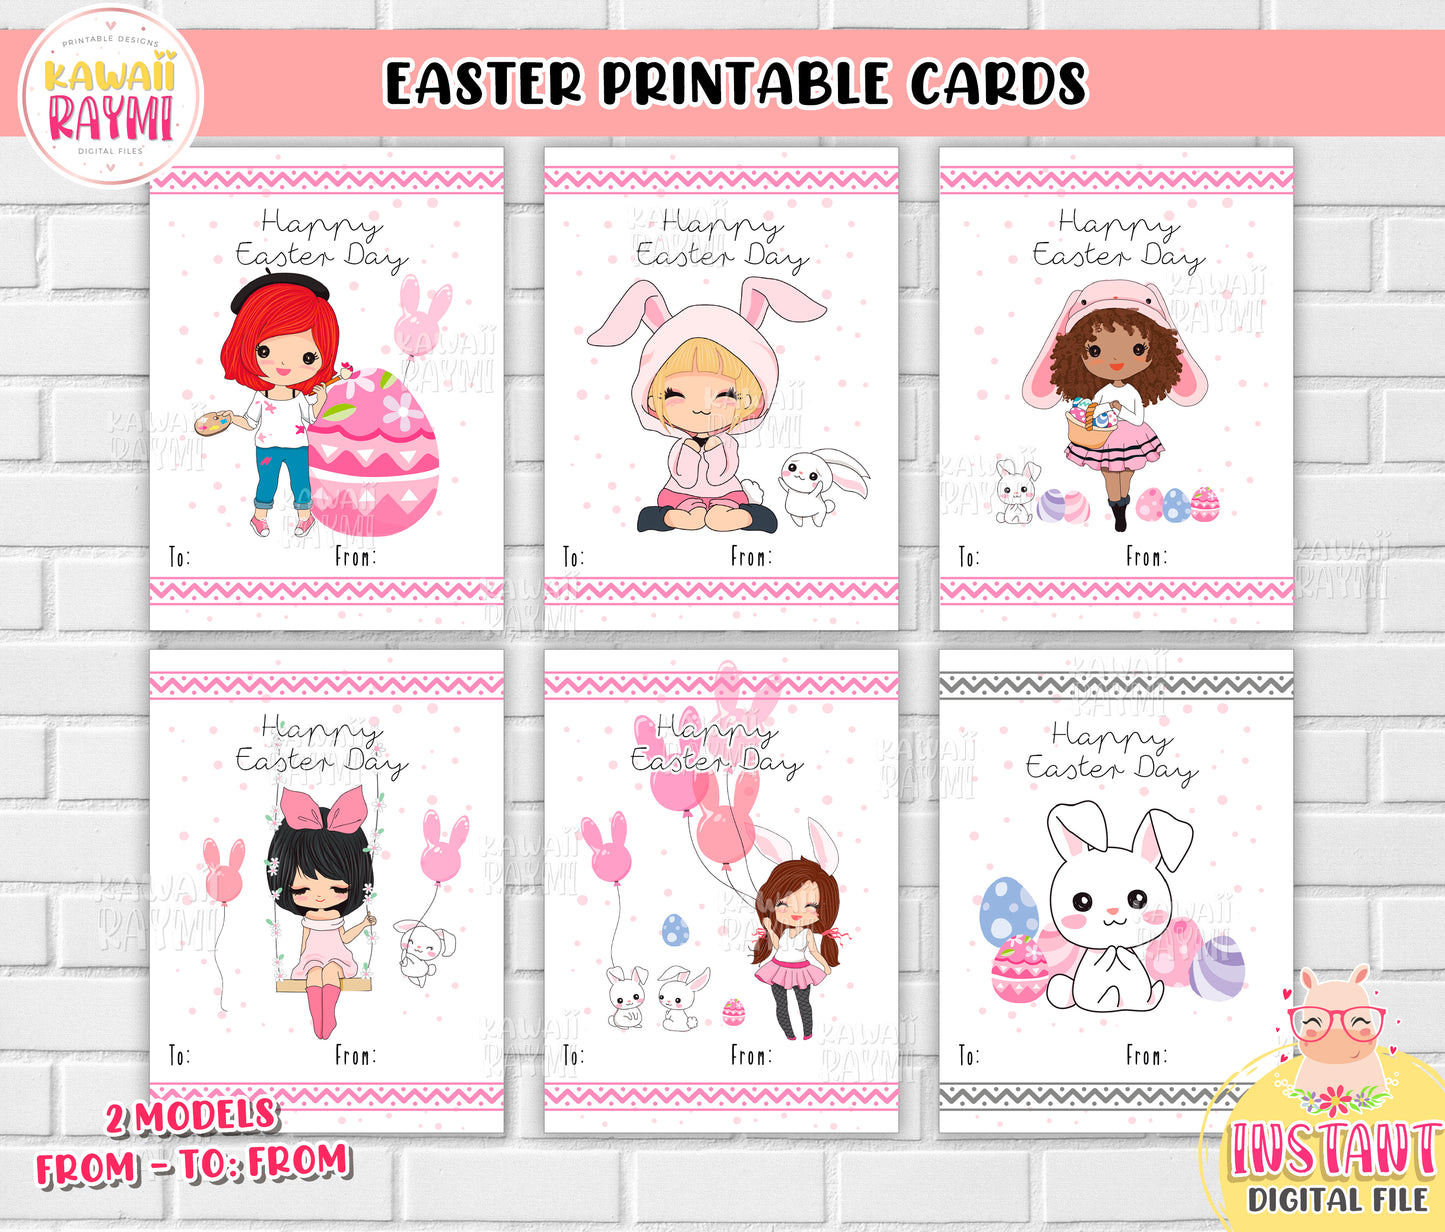 Easter Greeting Cards, Whimsical Easter Cards Pack, Bunny Easter Cards, Easter Cards for Kids, Cute Easter Card